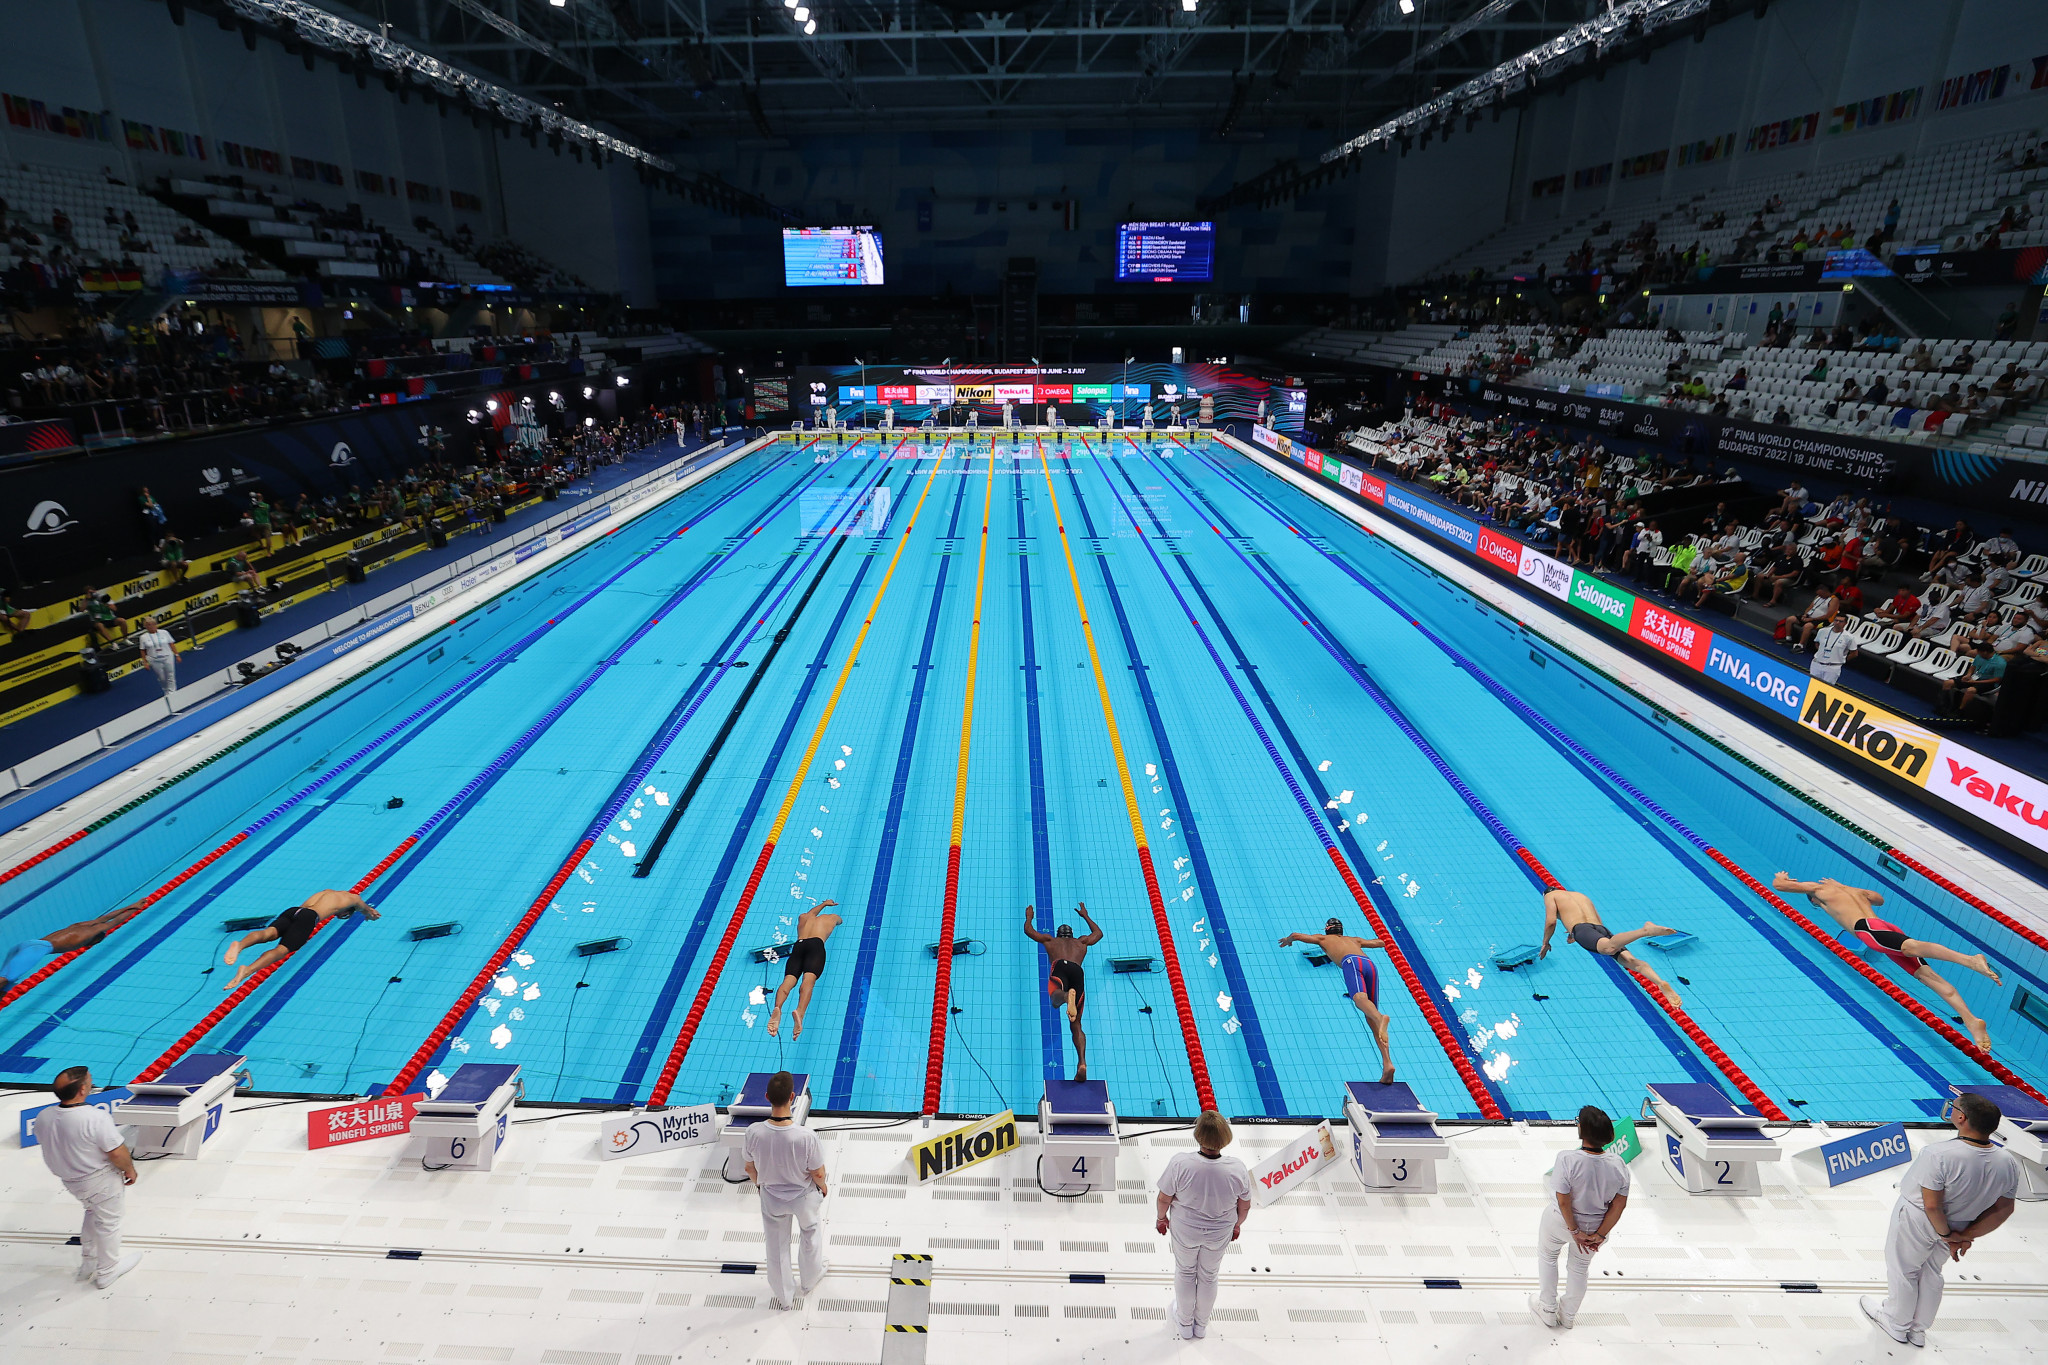 Budapest's Duna Arena is set to host the fourth day of swimming heats and finals tomorrow at the FINA World Championships ©Getty Images